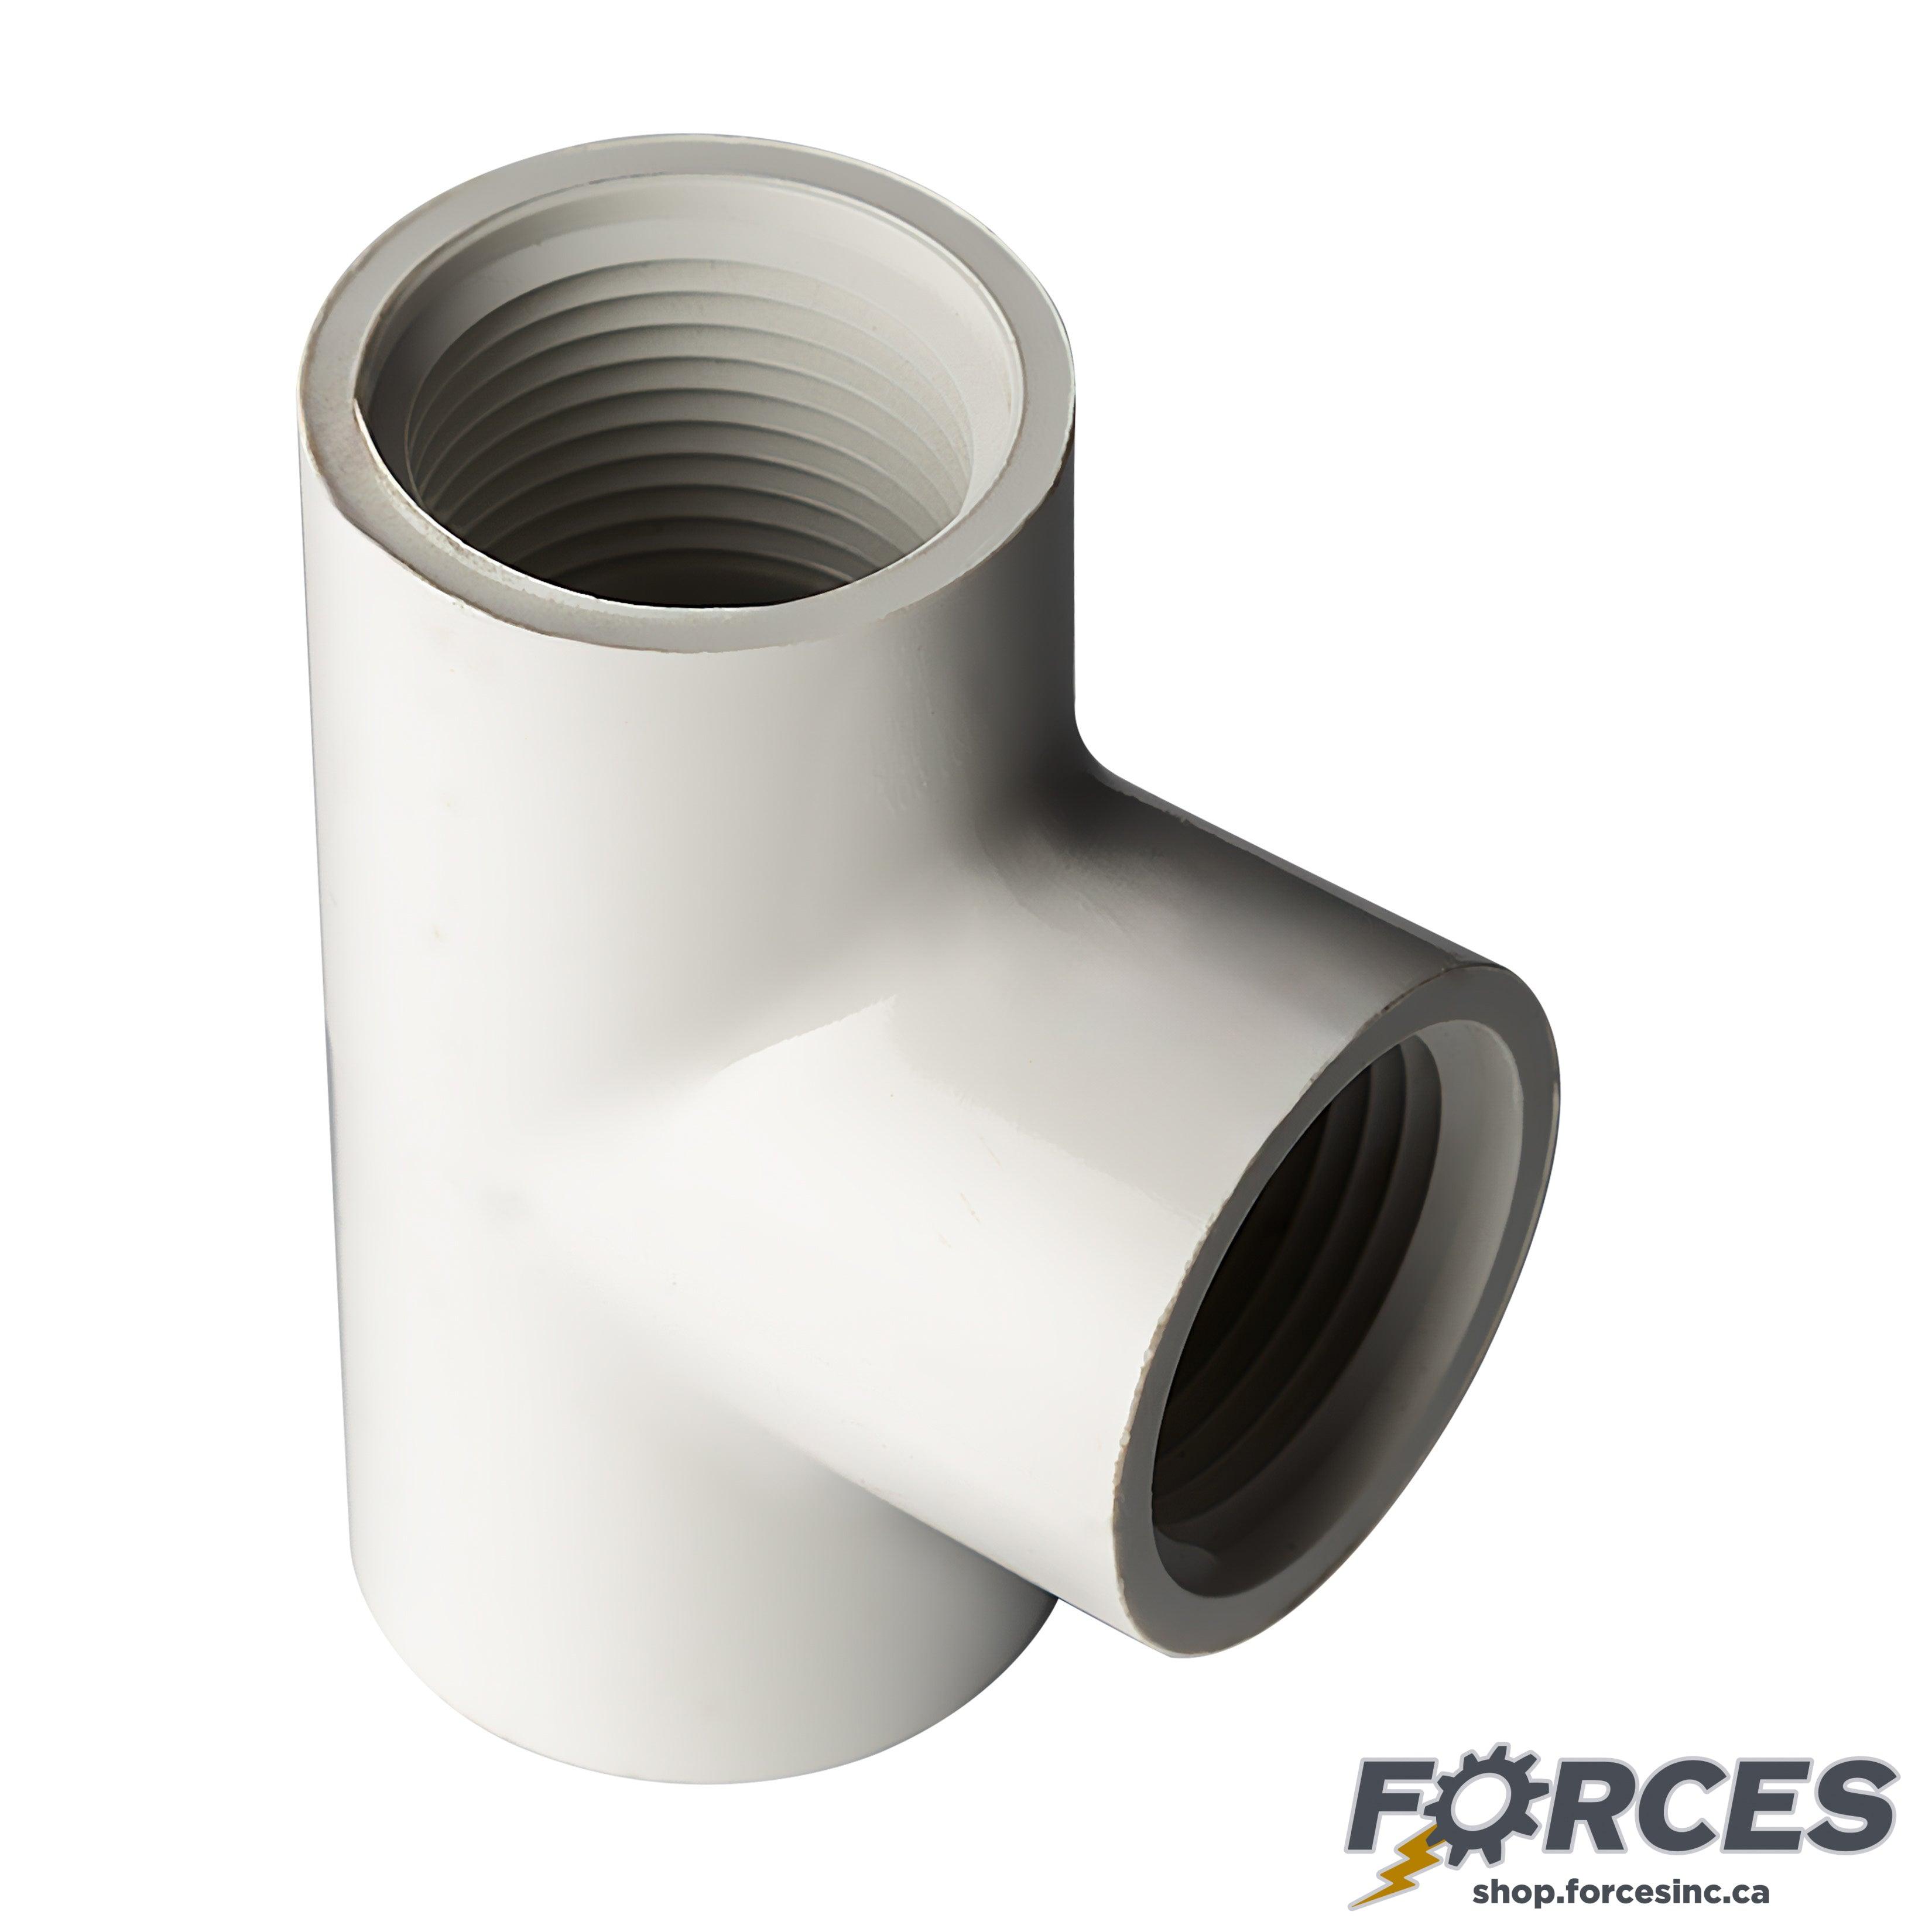 1-1/2" Tee (Threaded) Sch 40 - PVC white | 405015W - Forces Inc